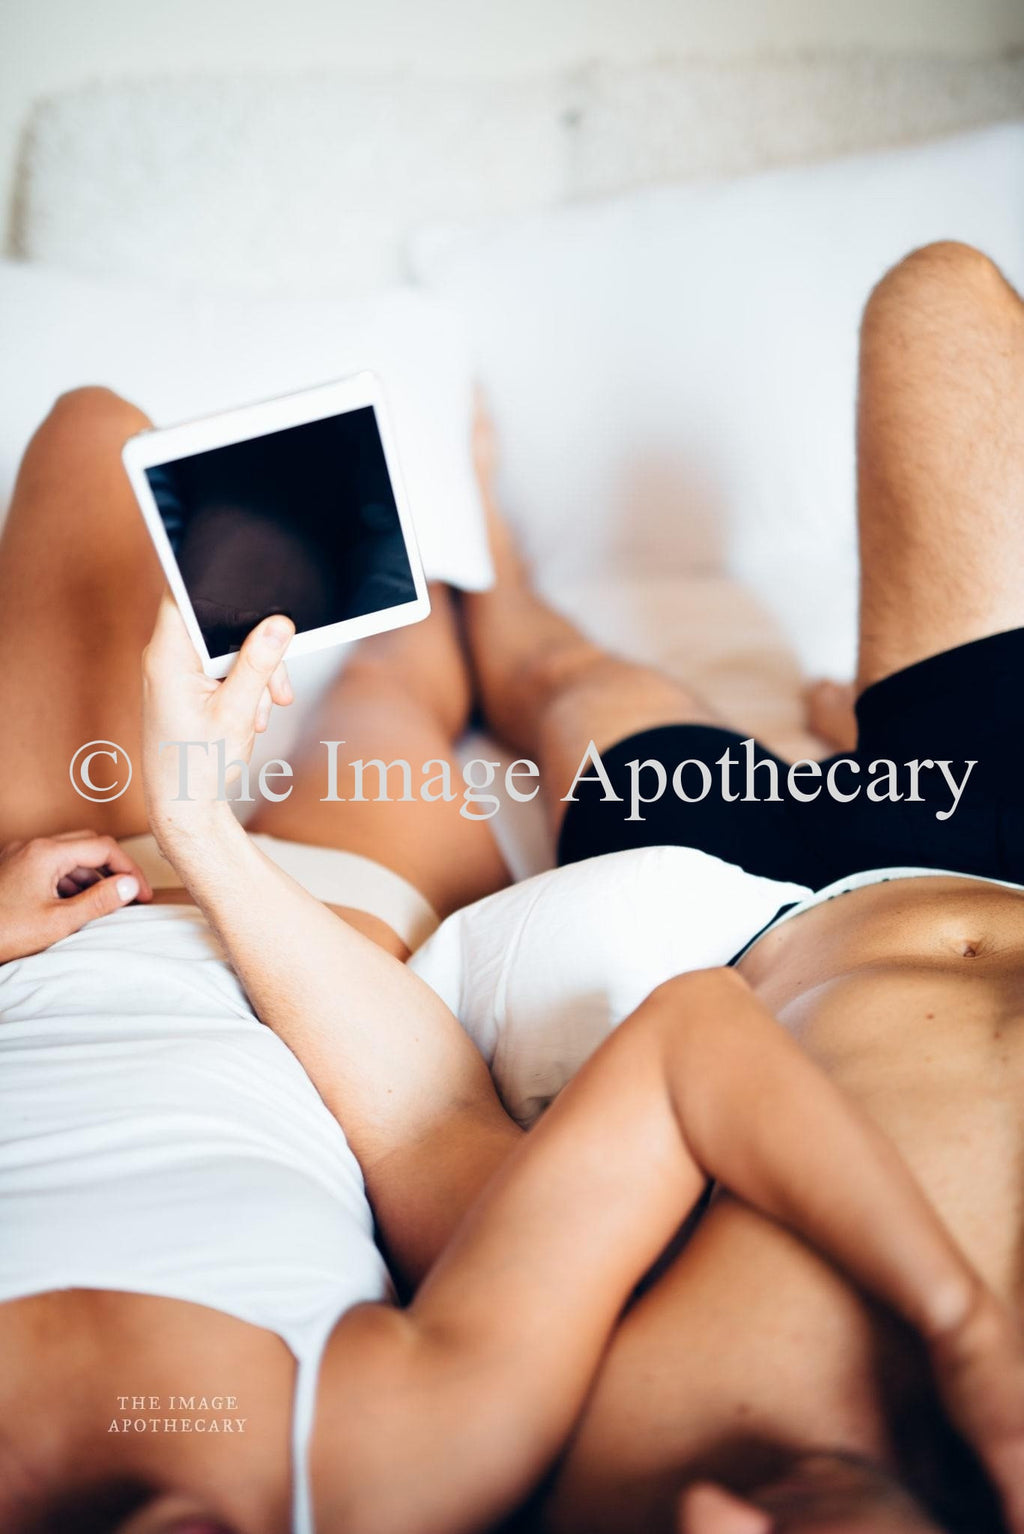 TheImageApothecary-27 - Stock Photography by The Image Apothecary